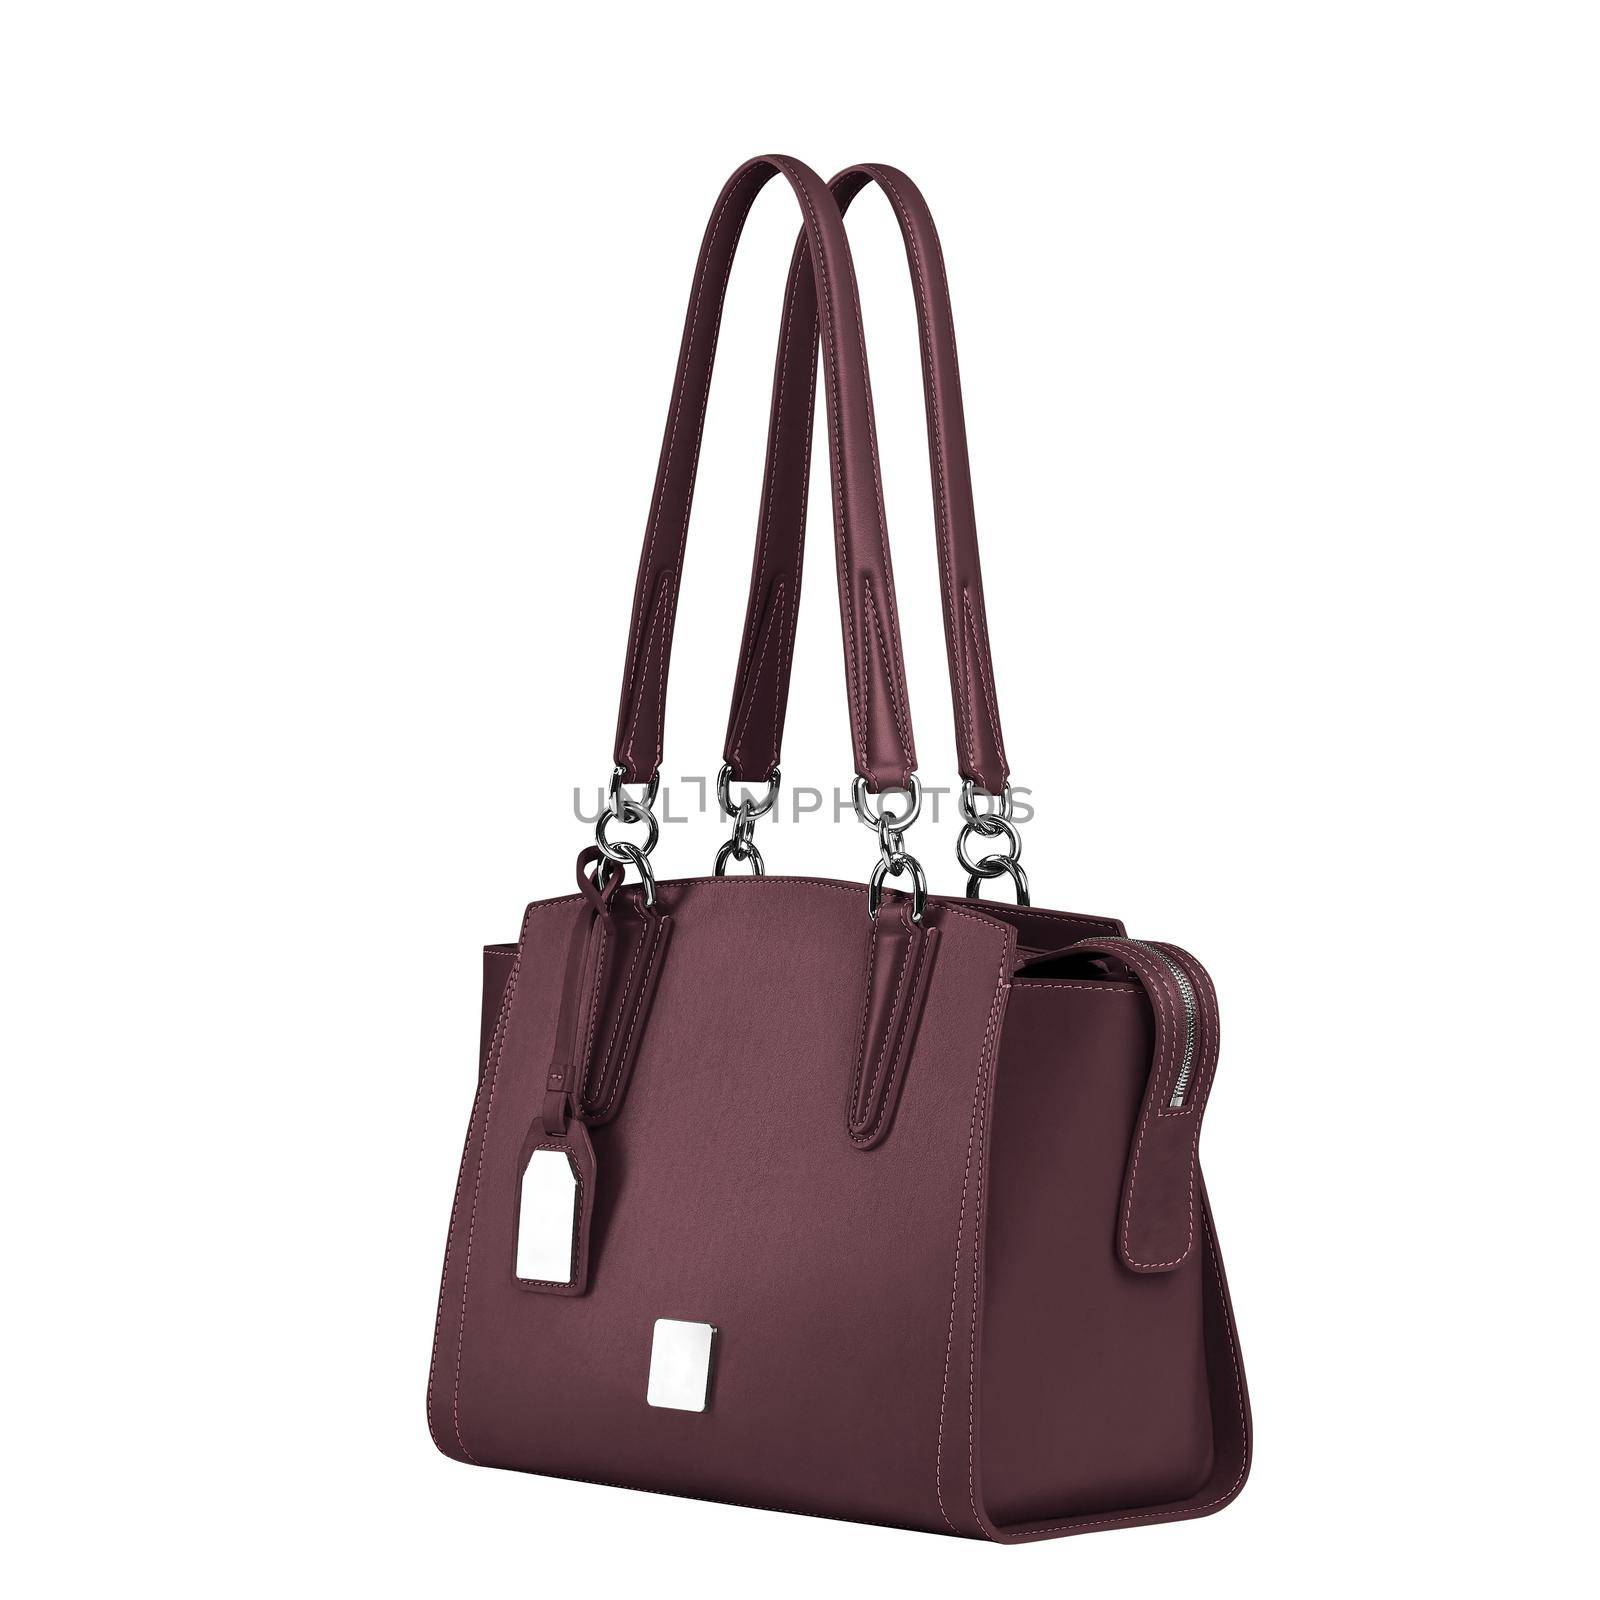 Practical dark burgundy women handbag with two handles, chrome fittings and blank labels isolated on white background. Exclusive handmade product made of genuine leather